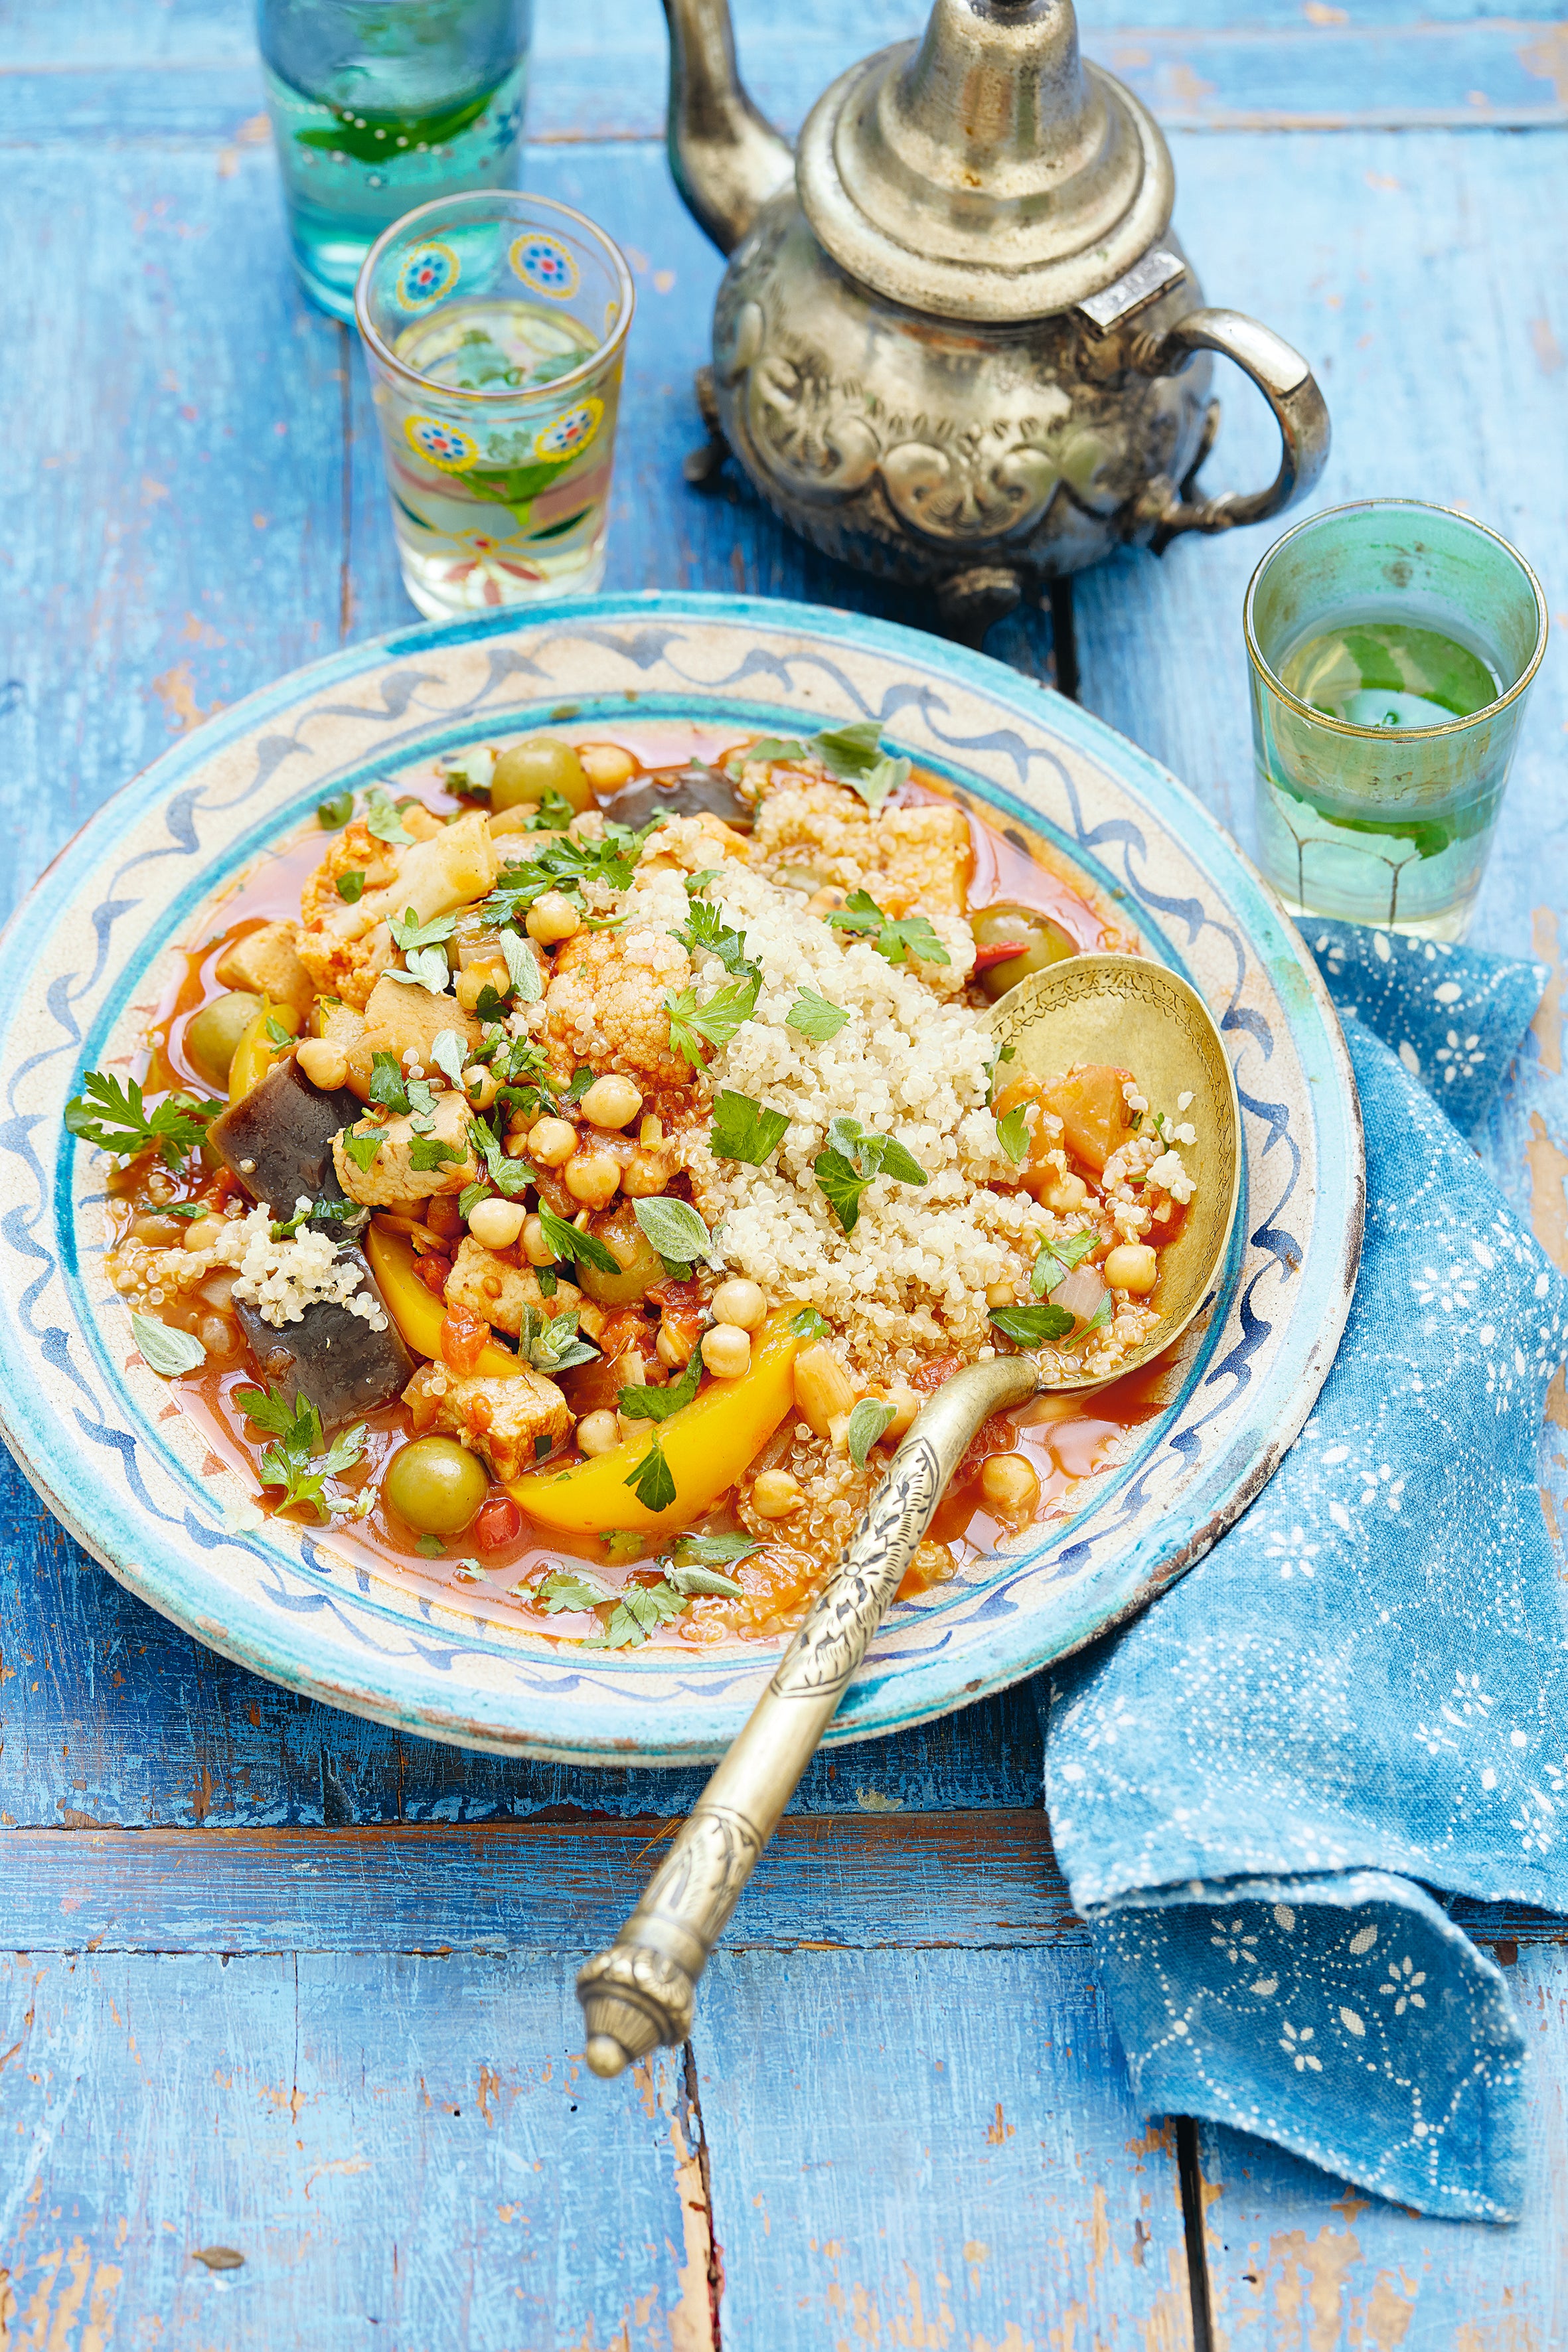 Moroccan-Style Vegetable Claypot With Quinoa